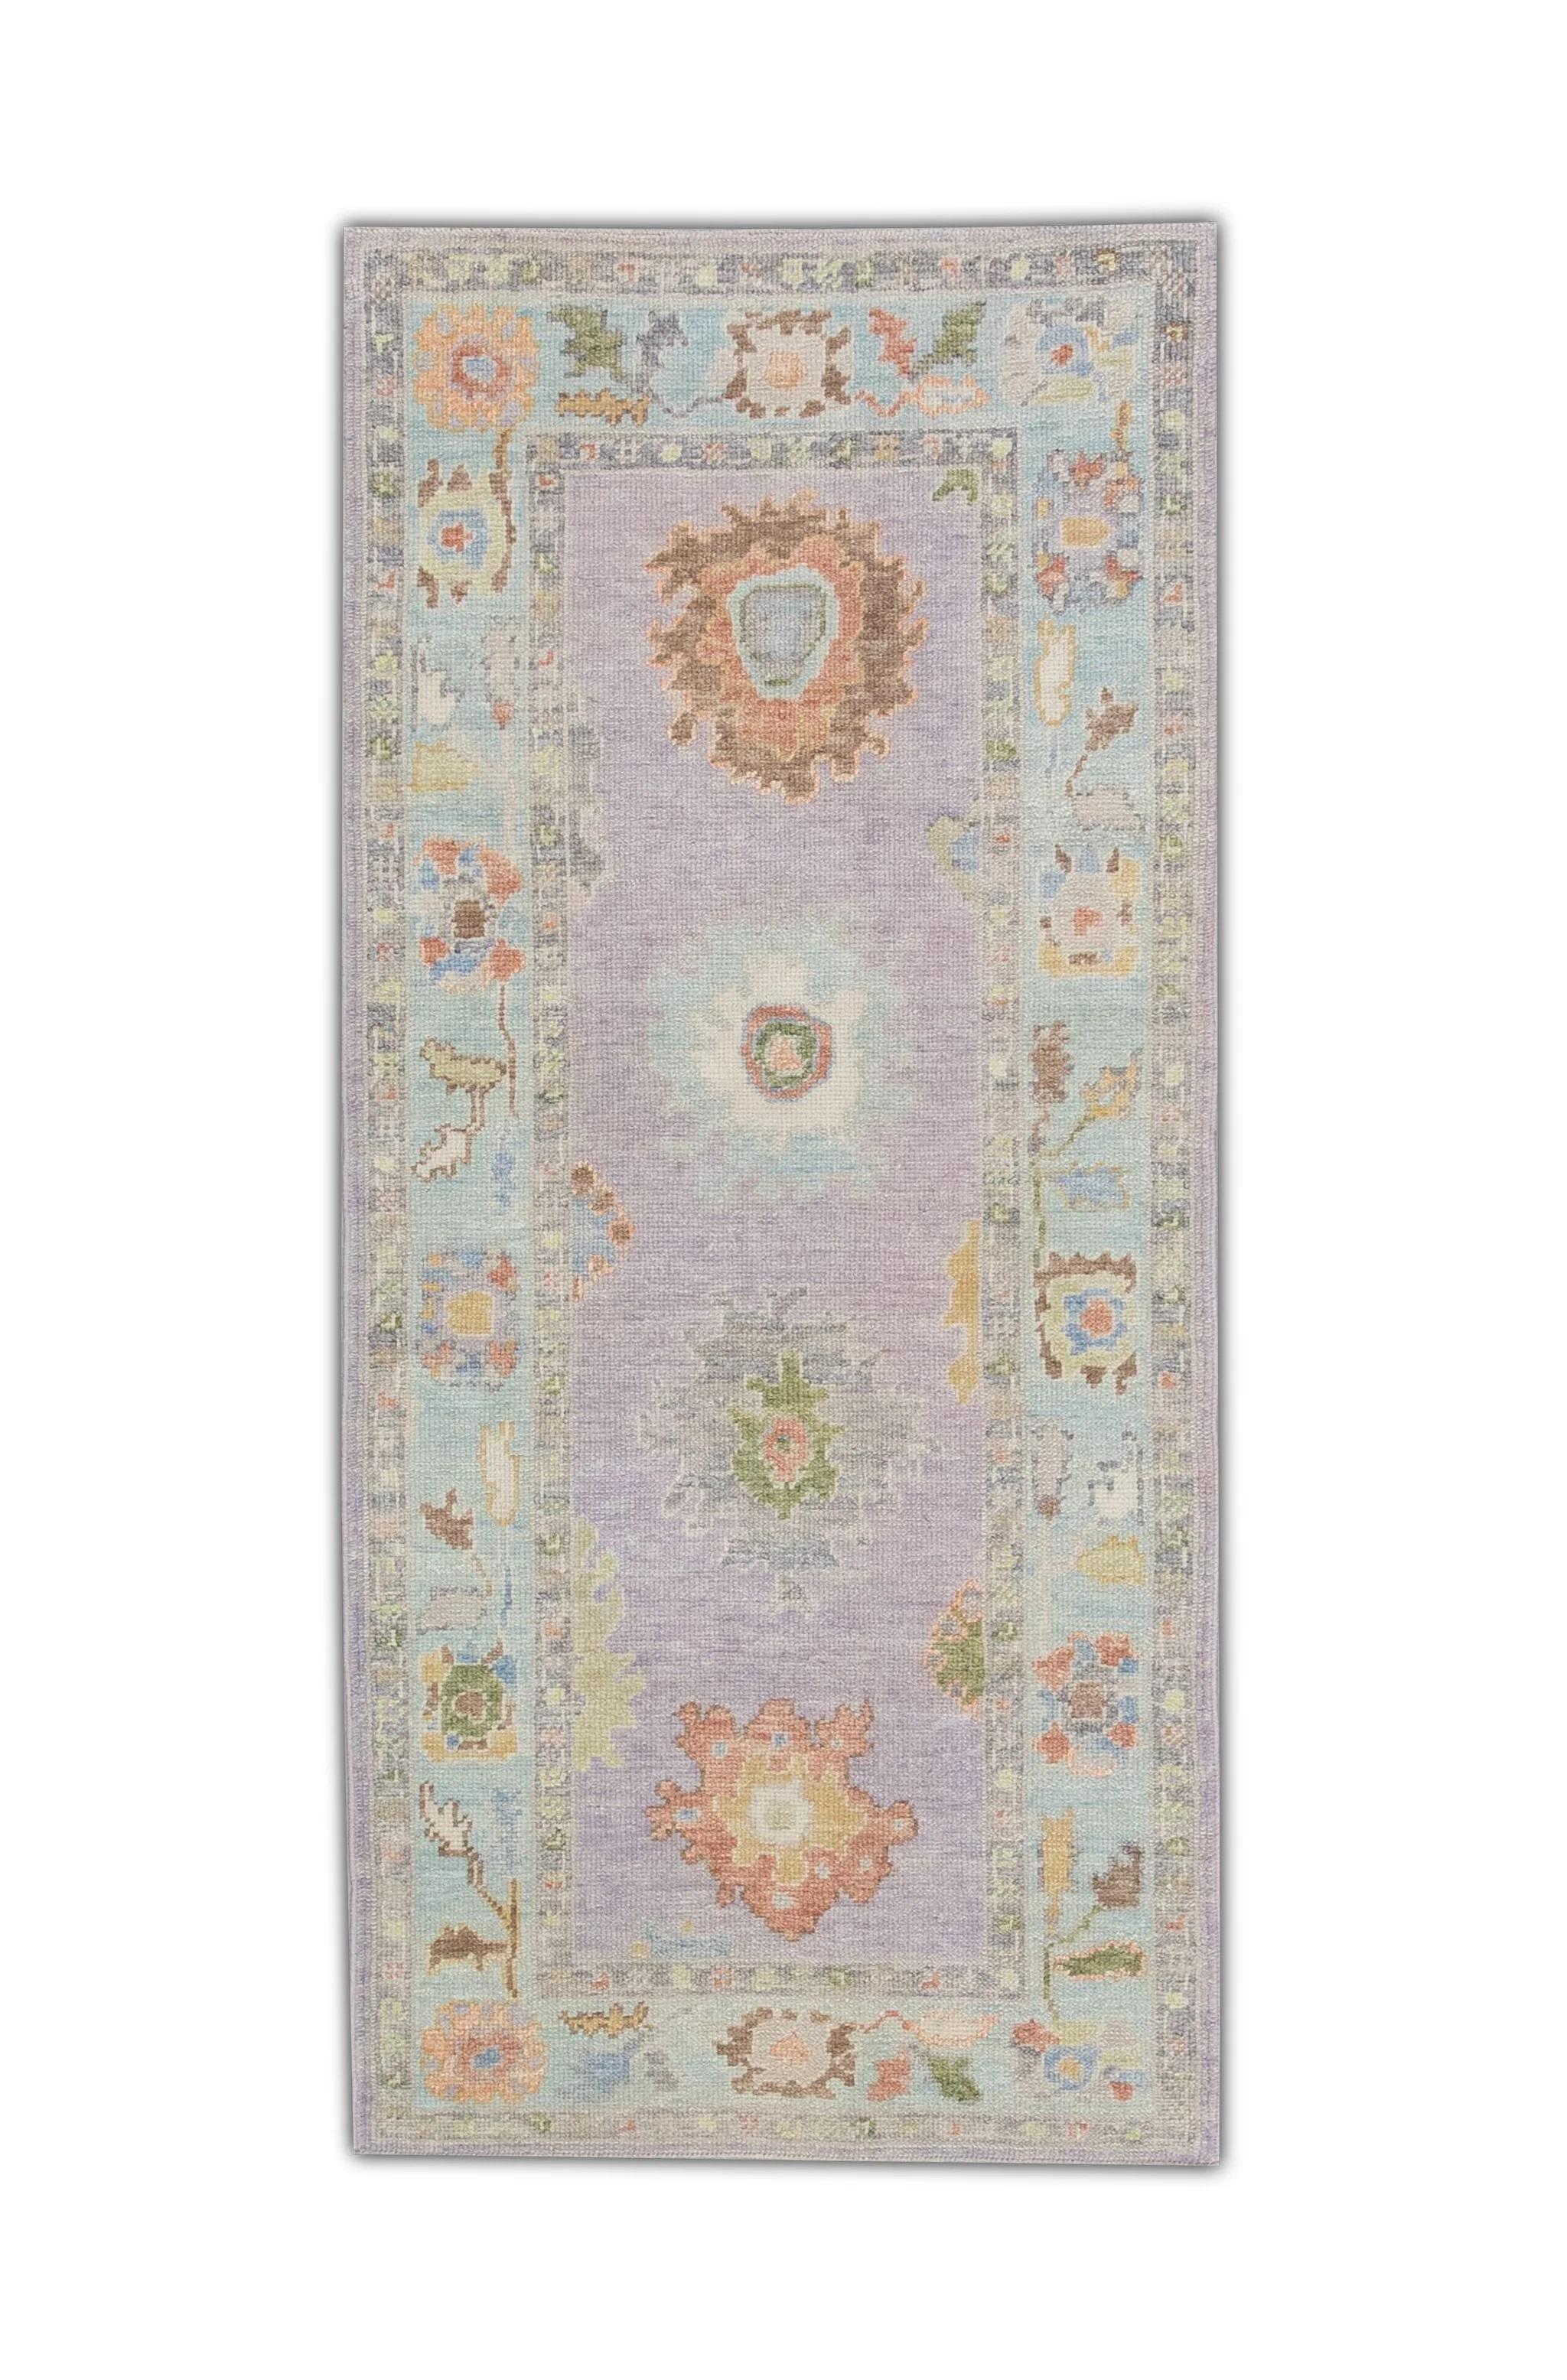 Handwoven Wool Turkish Oushak Rug with Lilac Floral Design 3'1